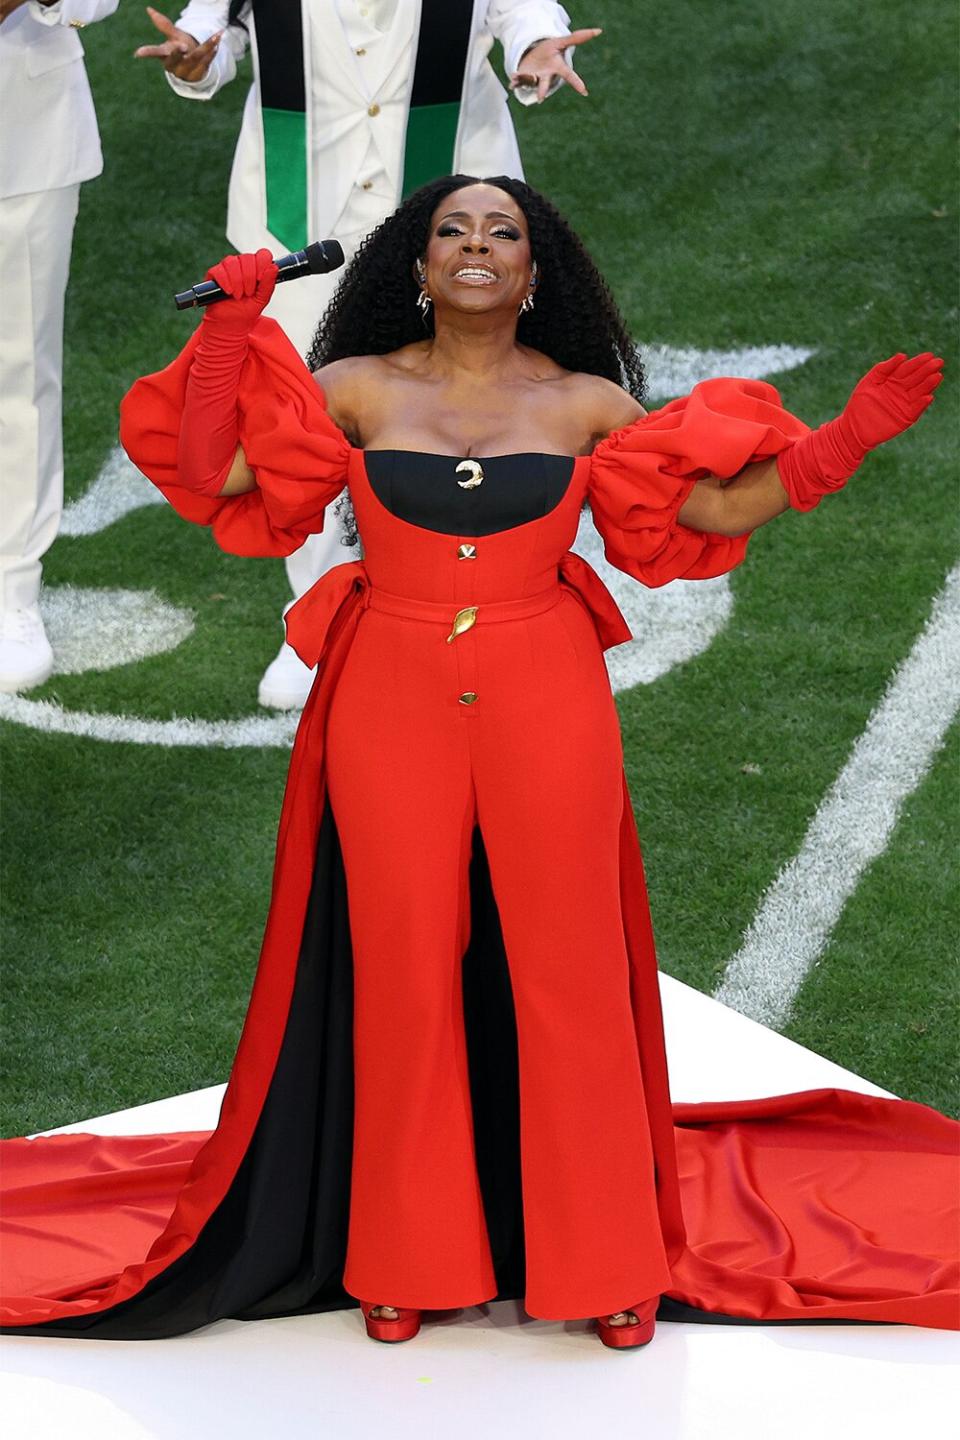 GLENDALE, ARIZONA - FEBRUARY 12: Sheryl Lee Ralph performs "Lift Every Voice and Sing" before Super Bowl LVII between the Kansas City Chiefs and the Philadelphia Eagles at State Farm Stadium on February 12, 2023 in Glendale, Arizona. (Photo by Rob Carr/Getty Images)